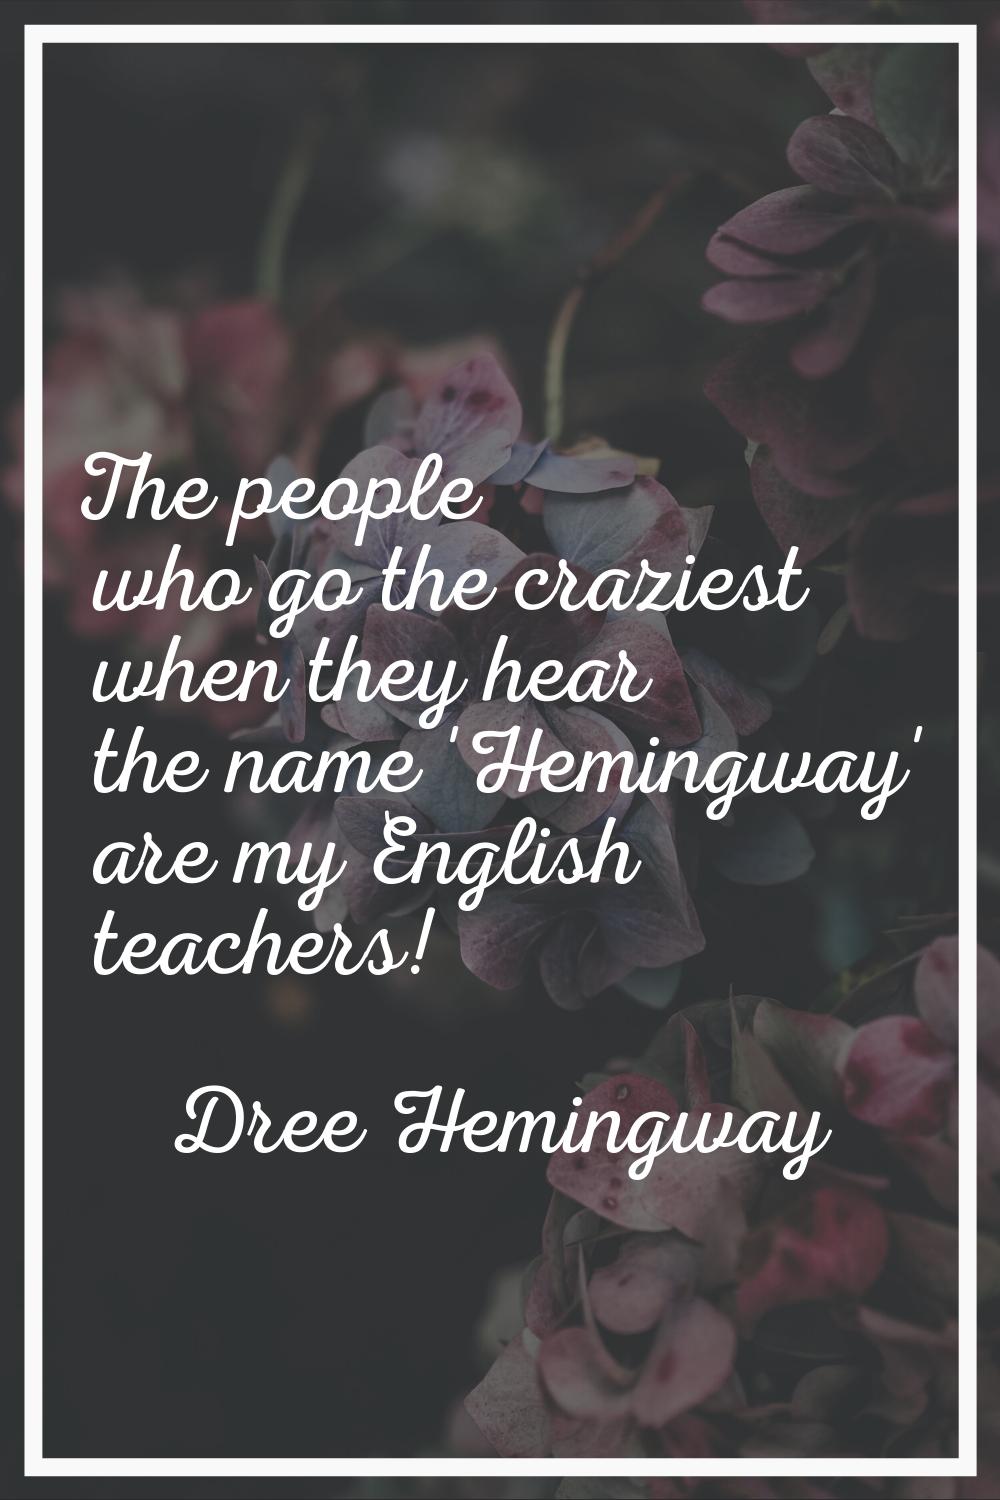 The people who go the craziest when they hear the name 'Hemingway' are my English teachers!